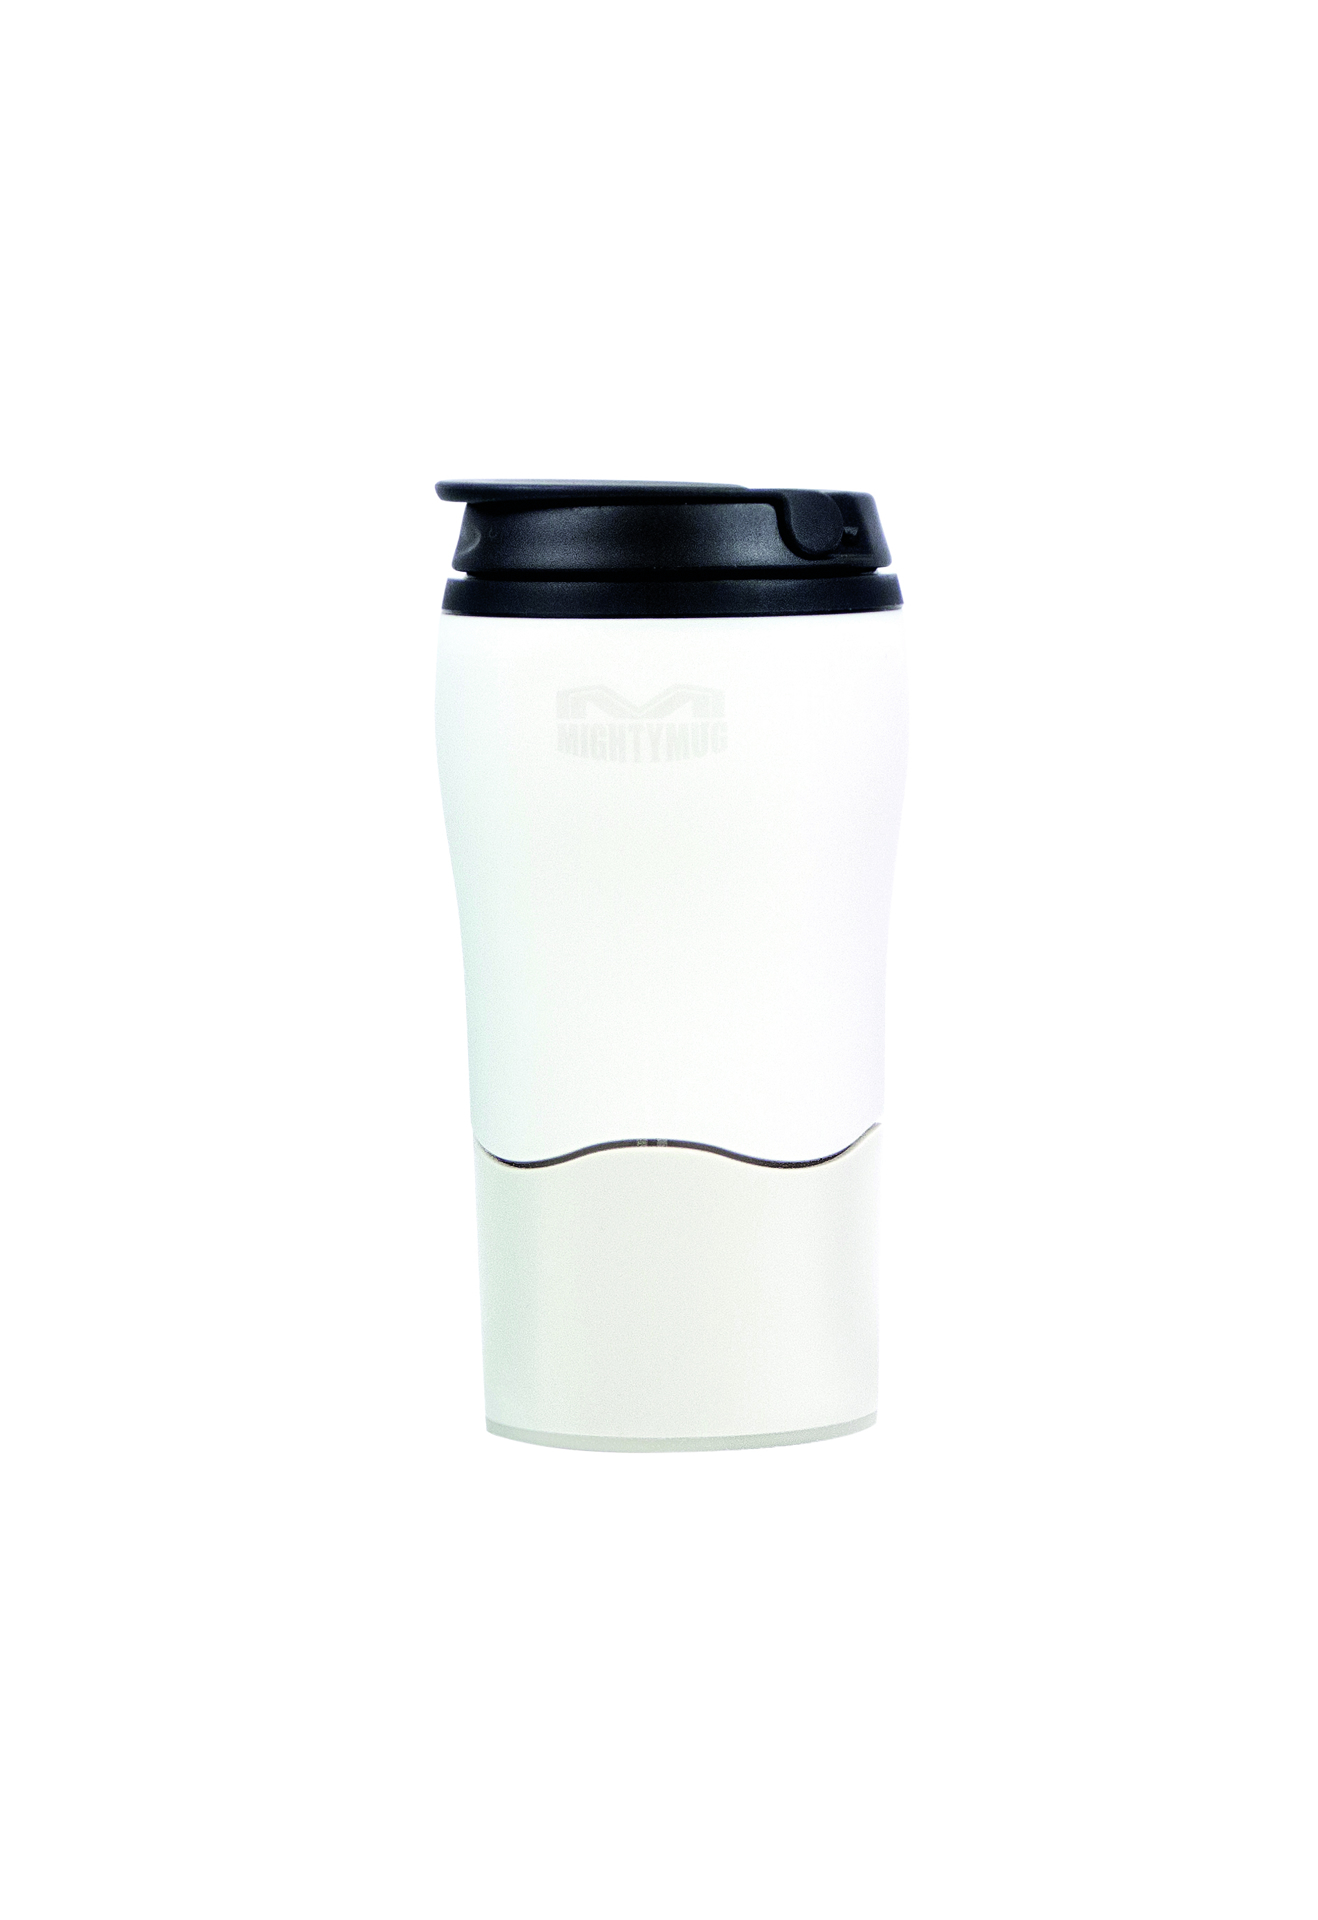 Mighty Mug Solo Travel Mug in white with black lid